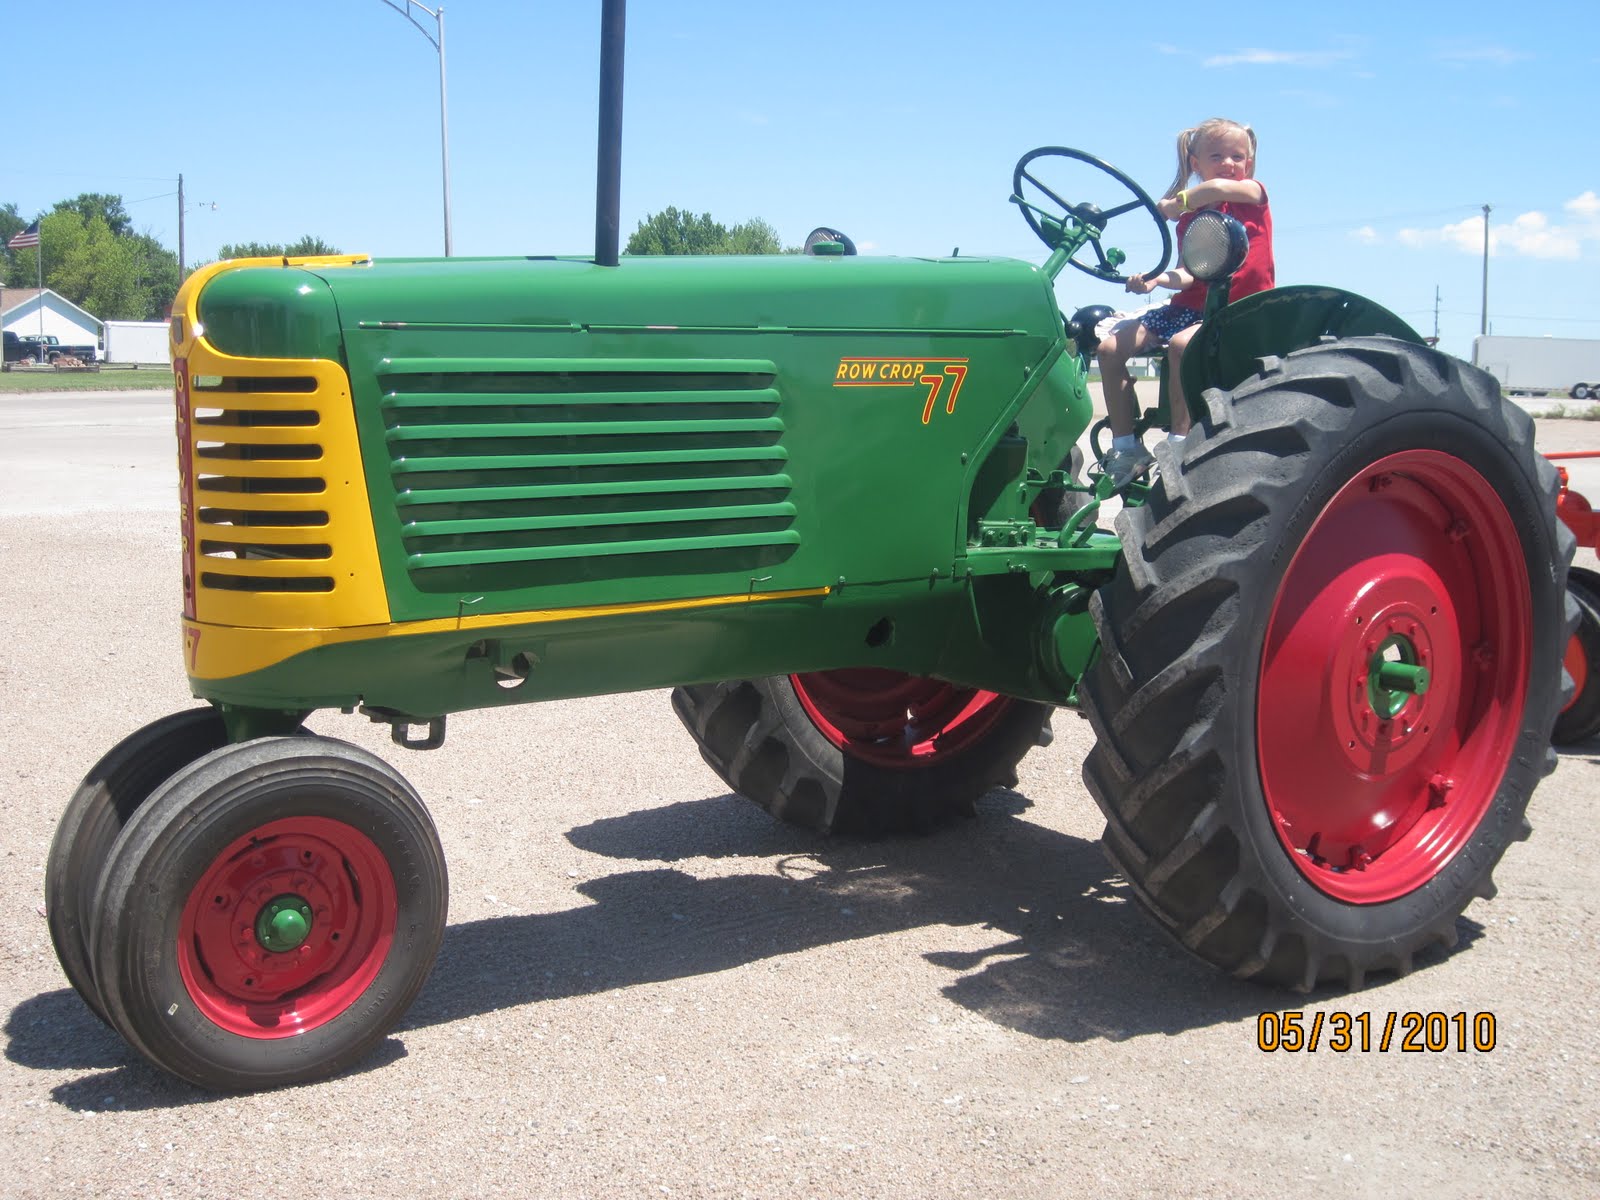 Johnson Family Tractors: 1951 Oliver 77 Rowcrop